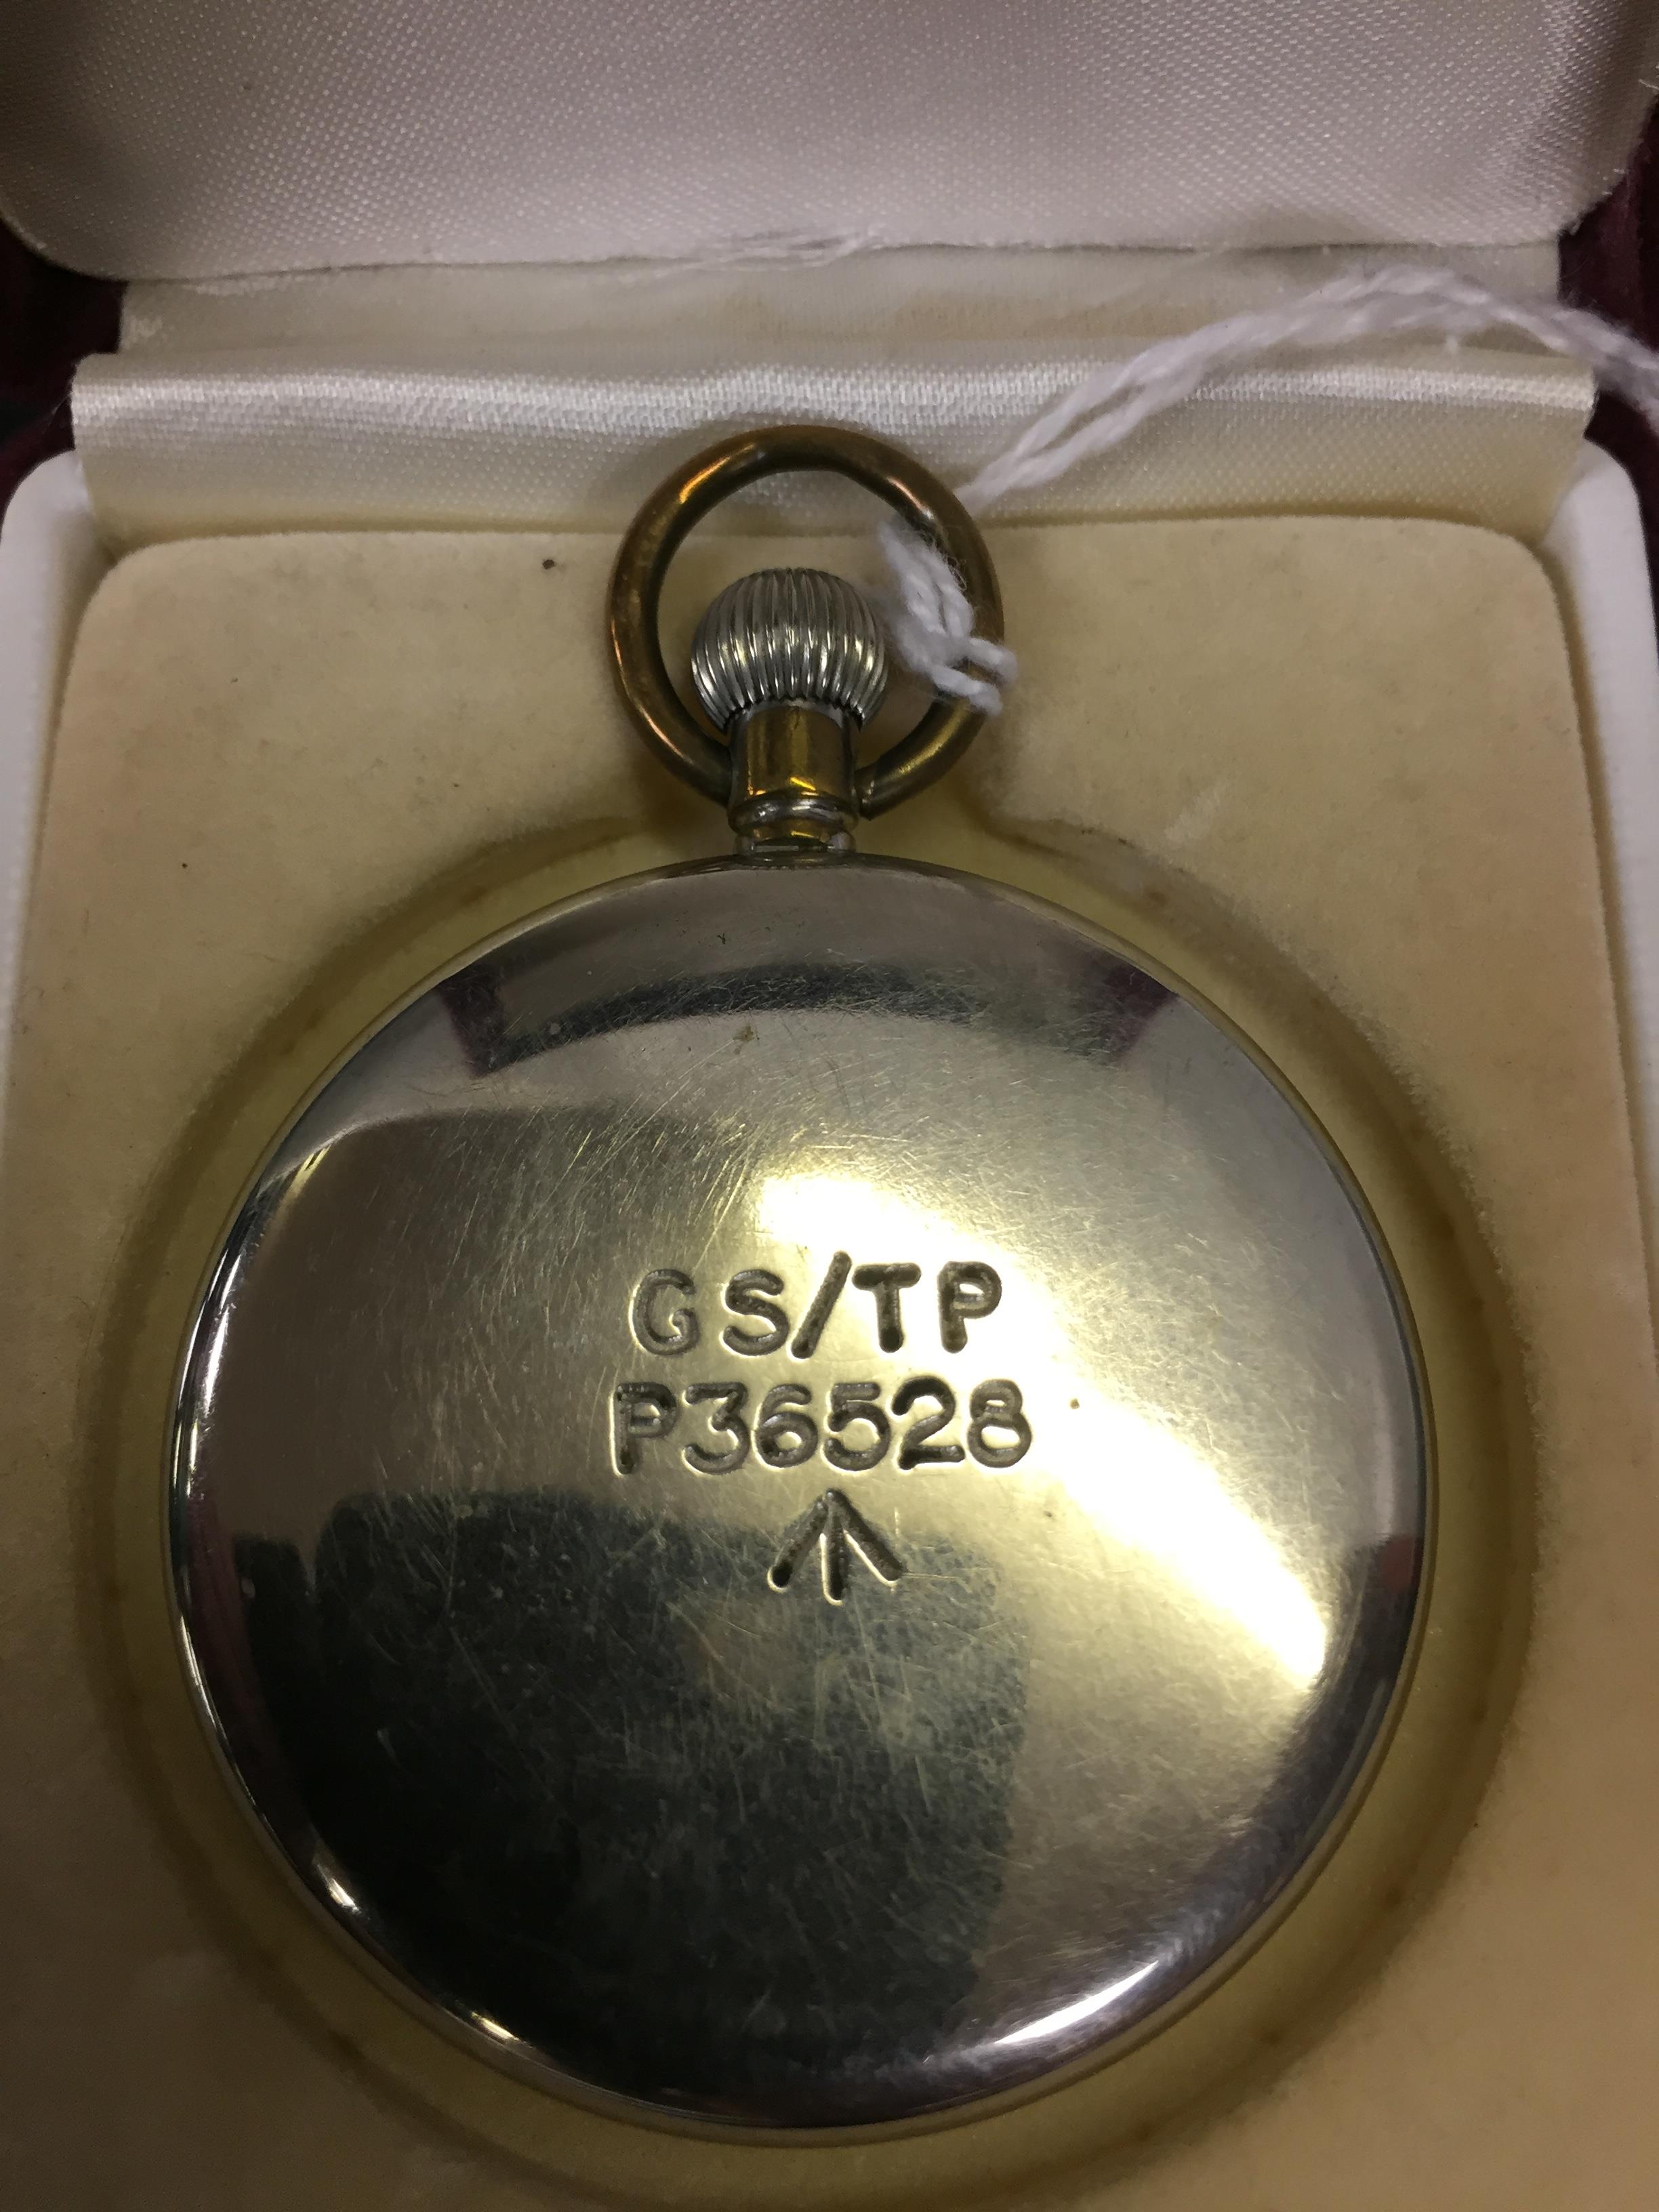 NICKEL CASED ARMY ISSUE POCKET WATCH WITH 15 JEWEL SWISS MOVEMENT, - Image 3 of 3